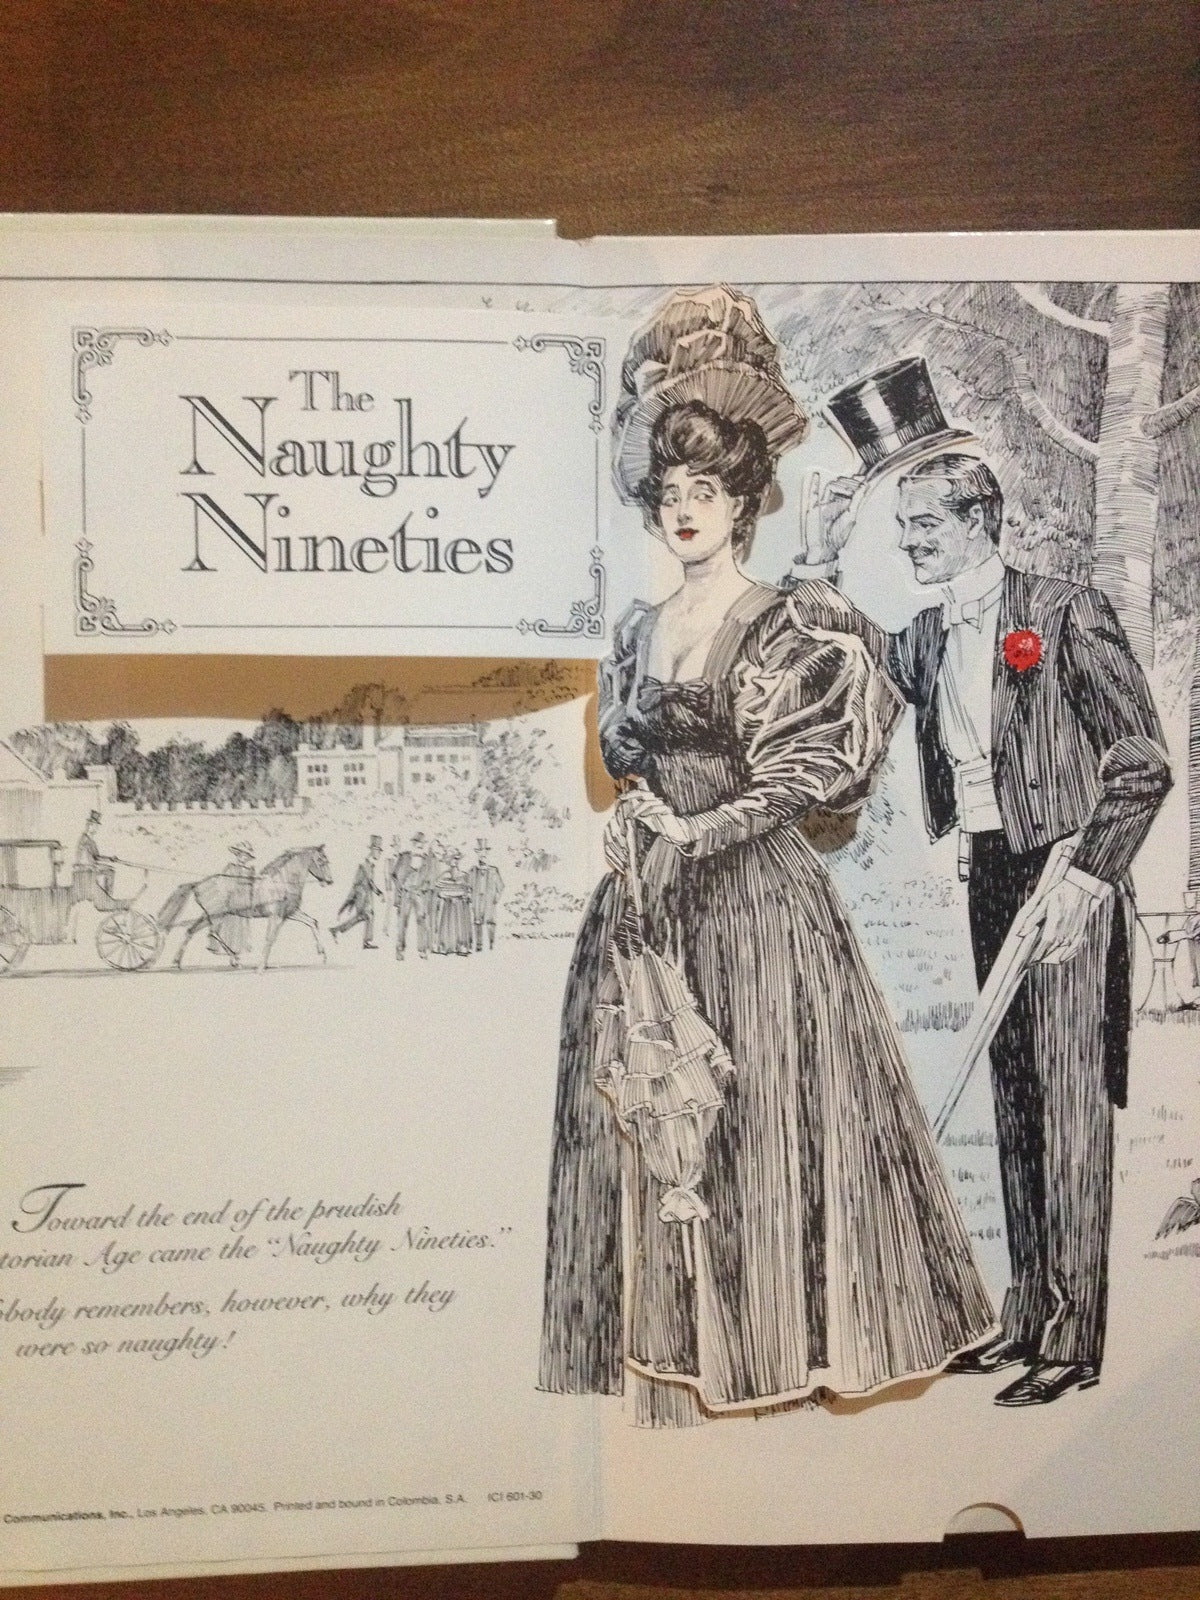 THE NAUGHTY NINETIES [SAUCY POP UP BOOK]  BY: PETER SEYMOUR BooksCardsNBikes